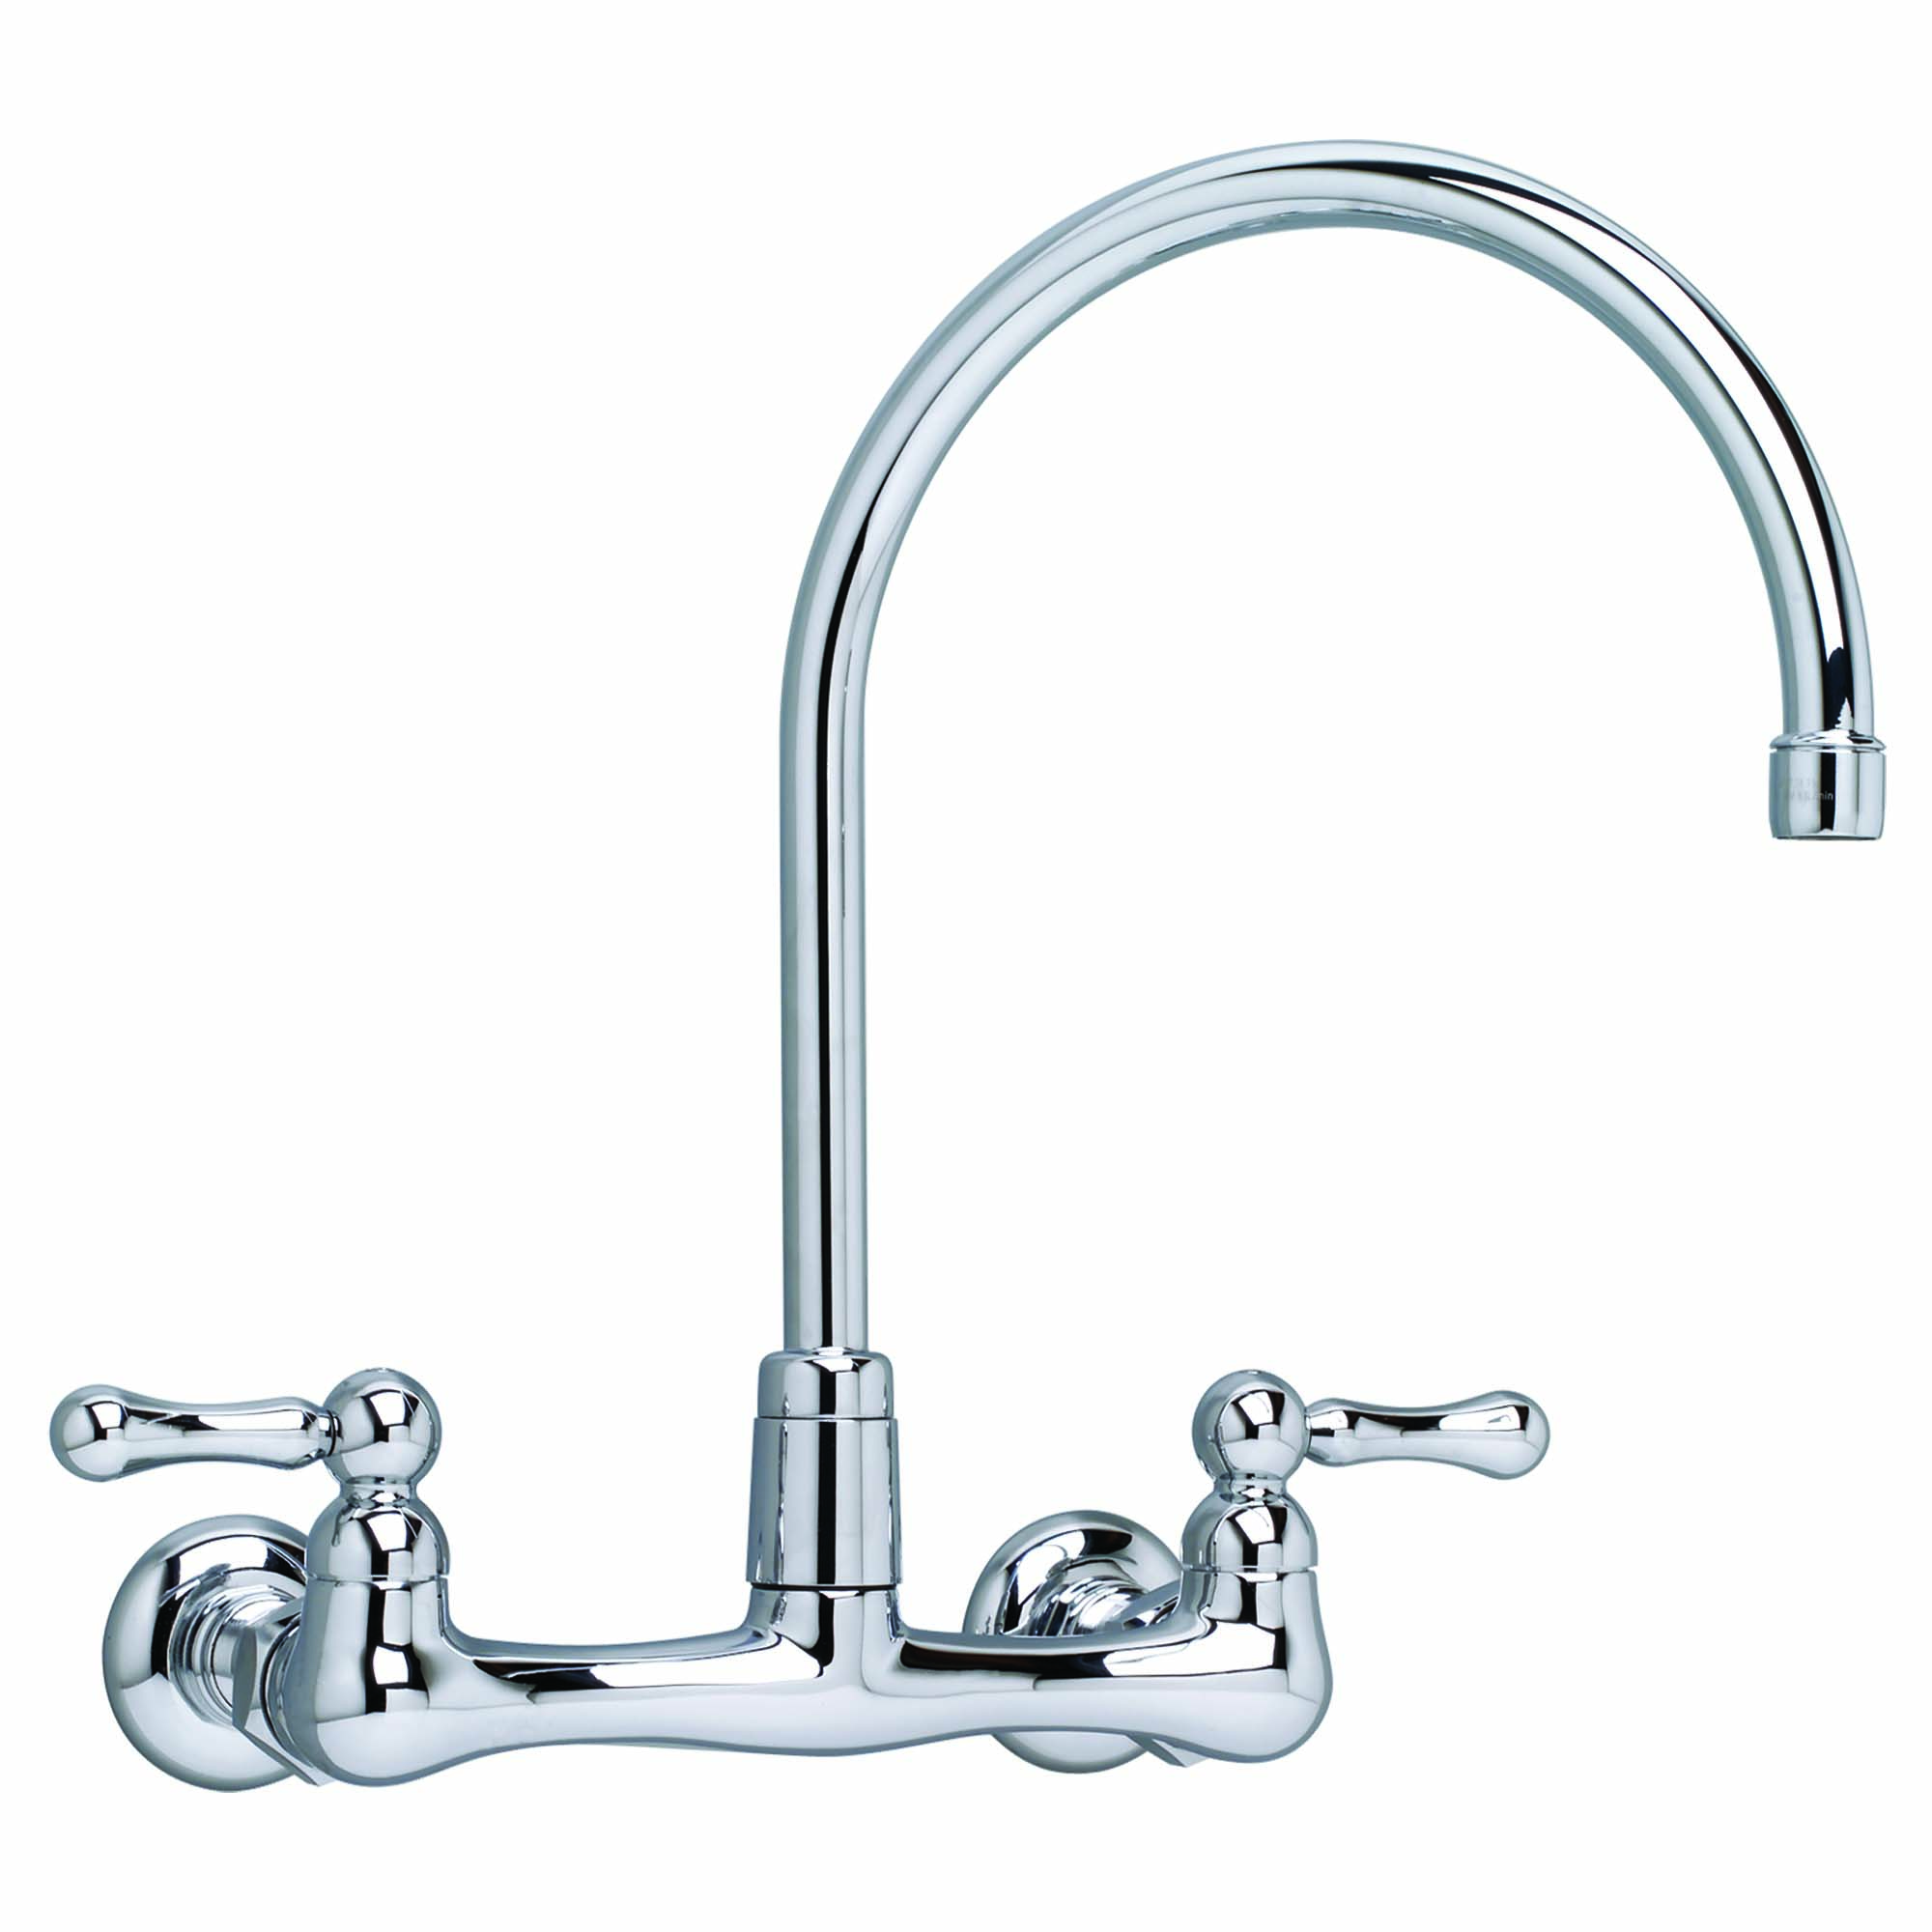 Heritage® Wall Mount Faucet With Gooseneck Spout and Lever Handles